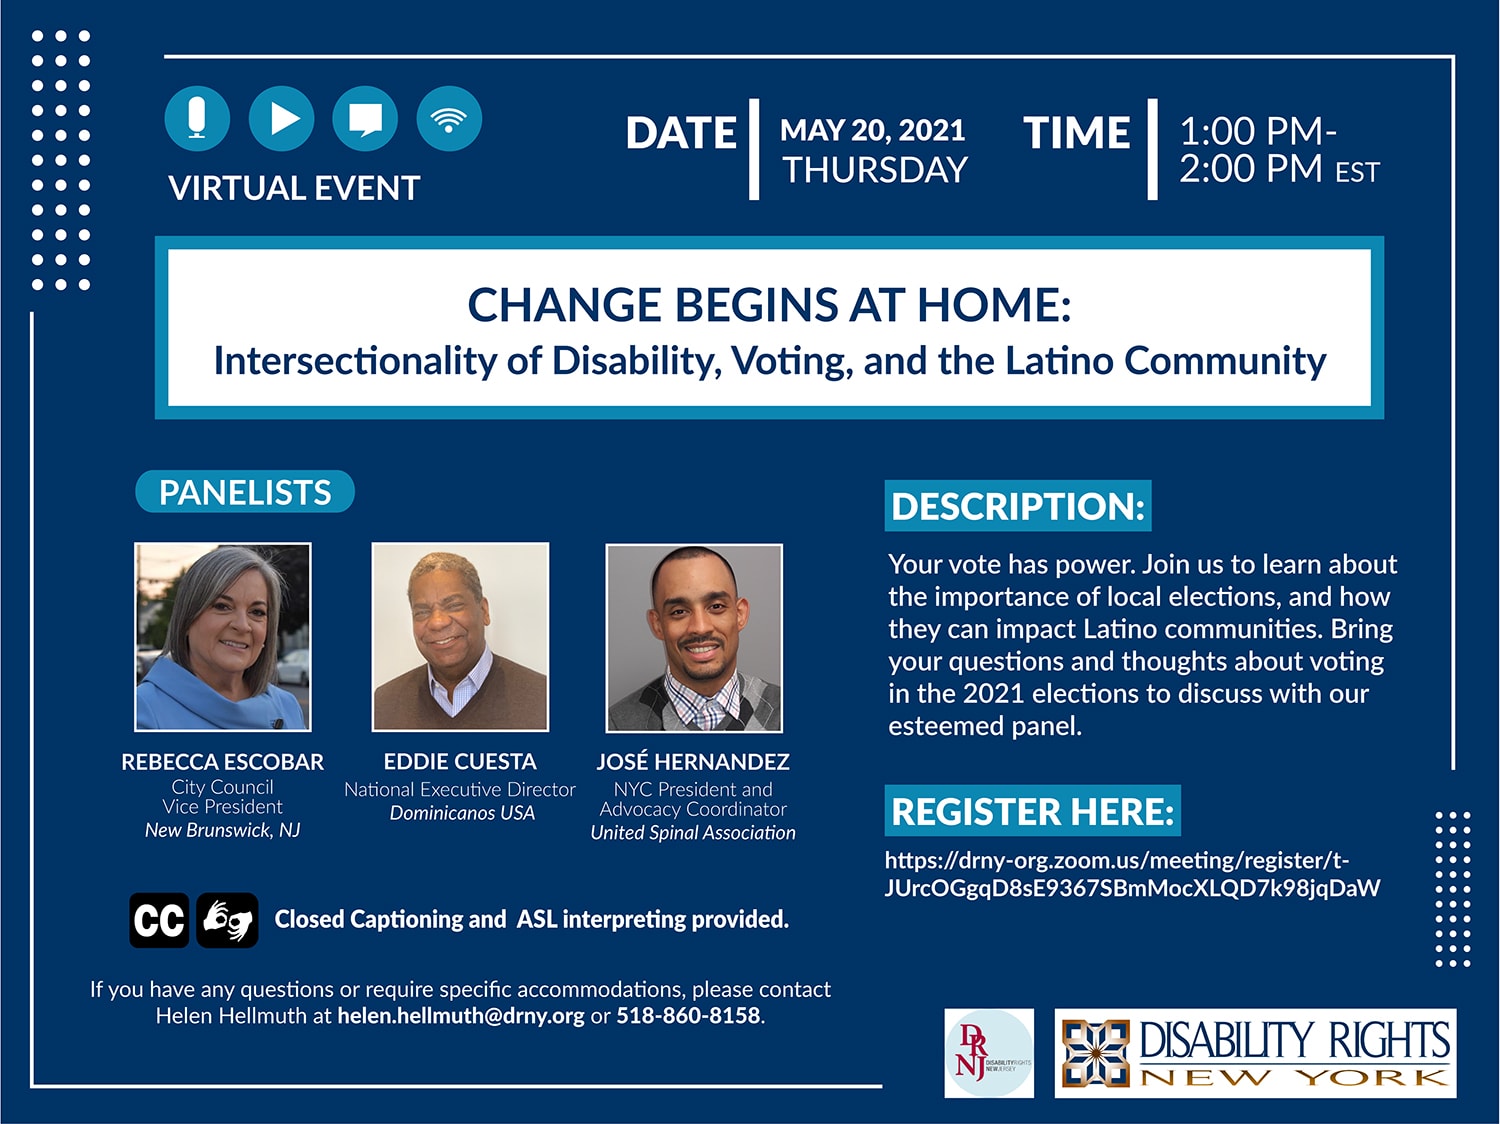 Change Begins at Home: Intersectionality of Disability, Voting, and the Latino Community 